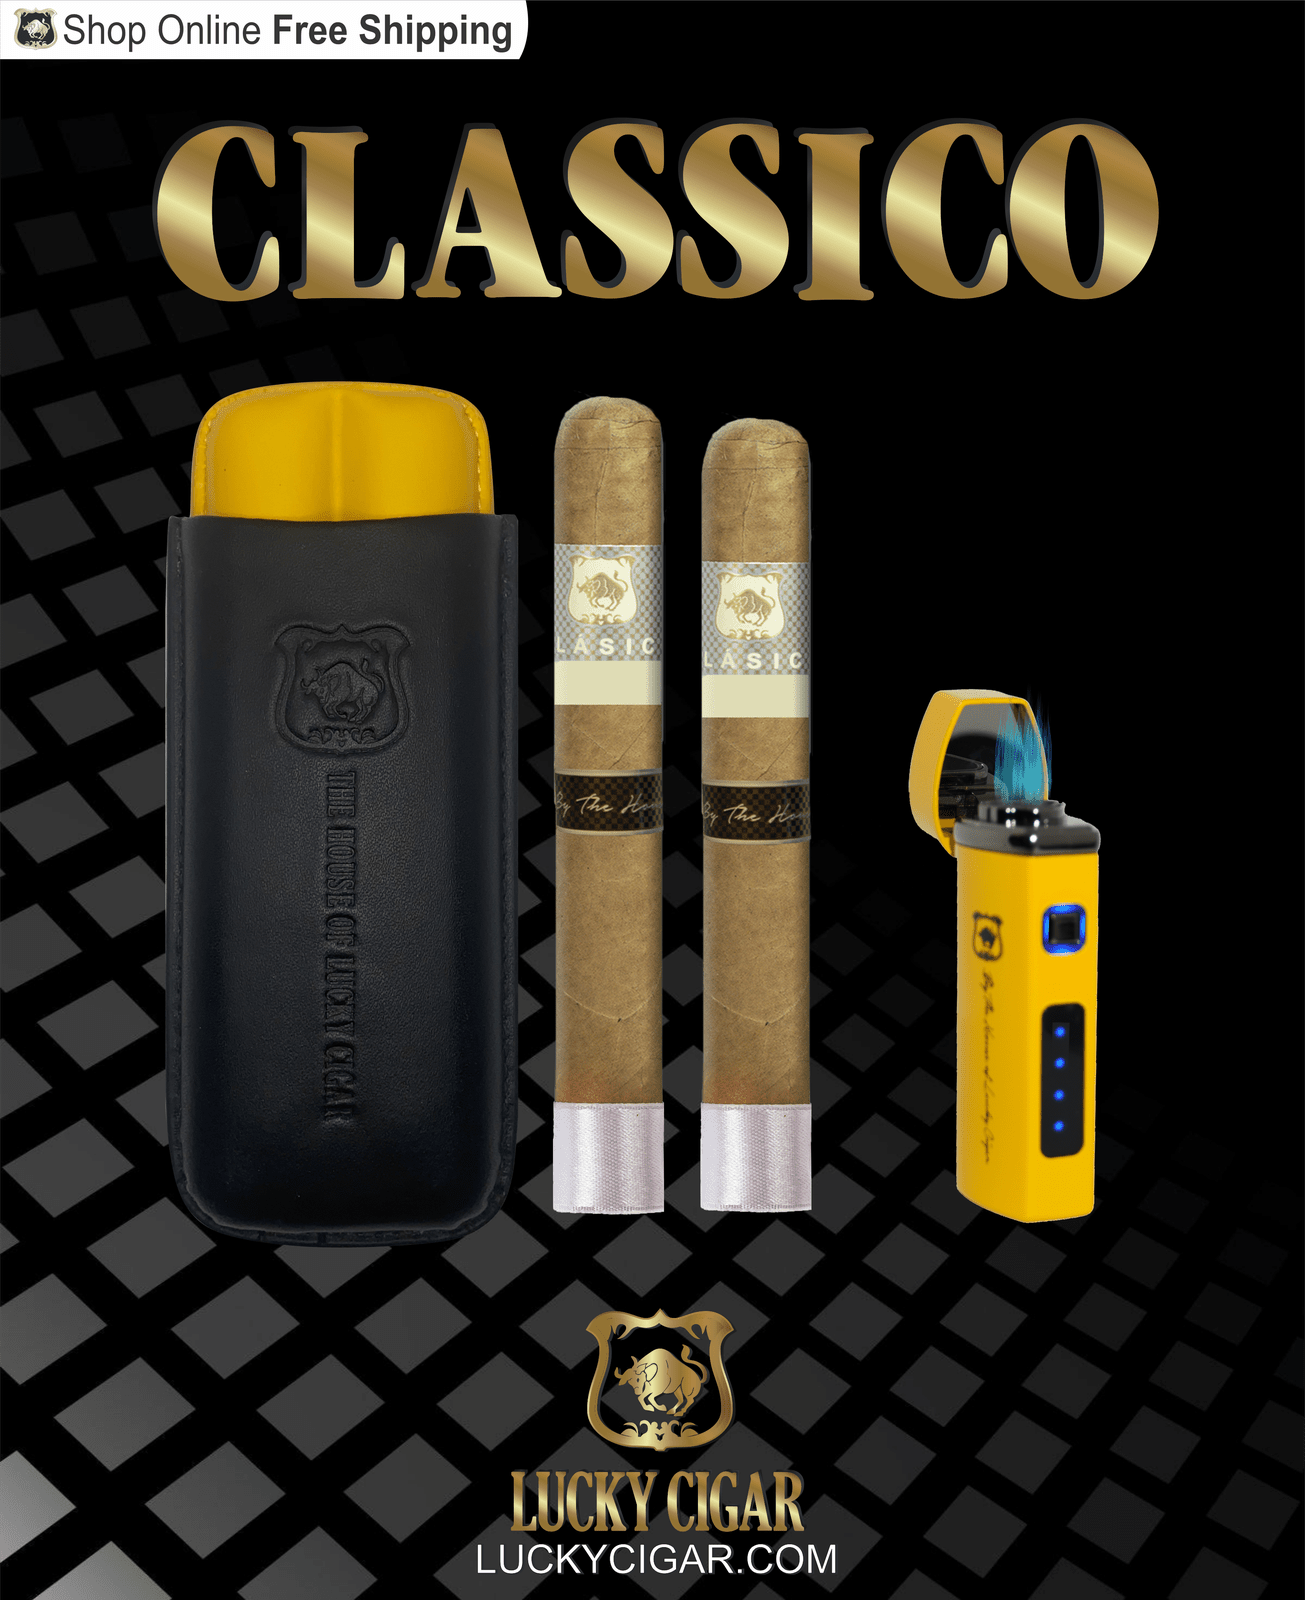 Lucky Cigar Sampler Sets: Set of 2 Toro 6x50 Classico Cigars with Travel Humidor Case, Torch